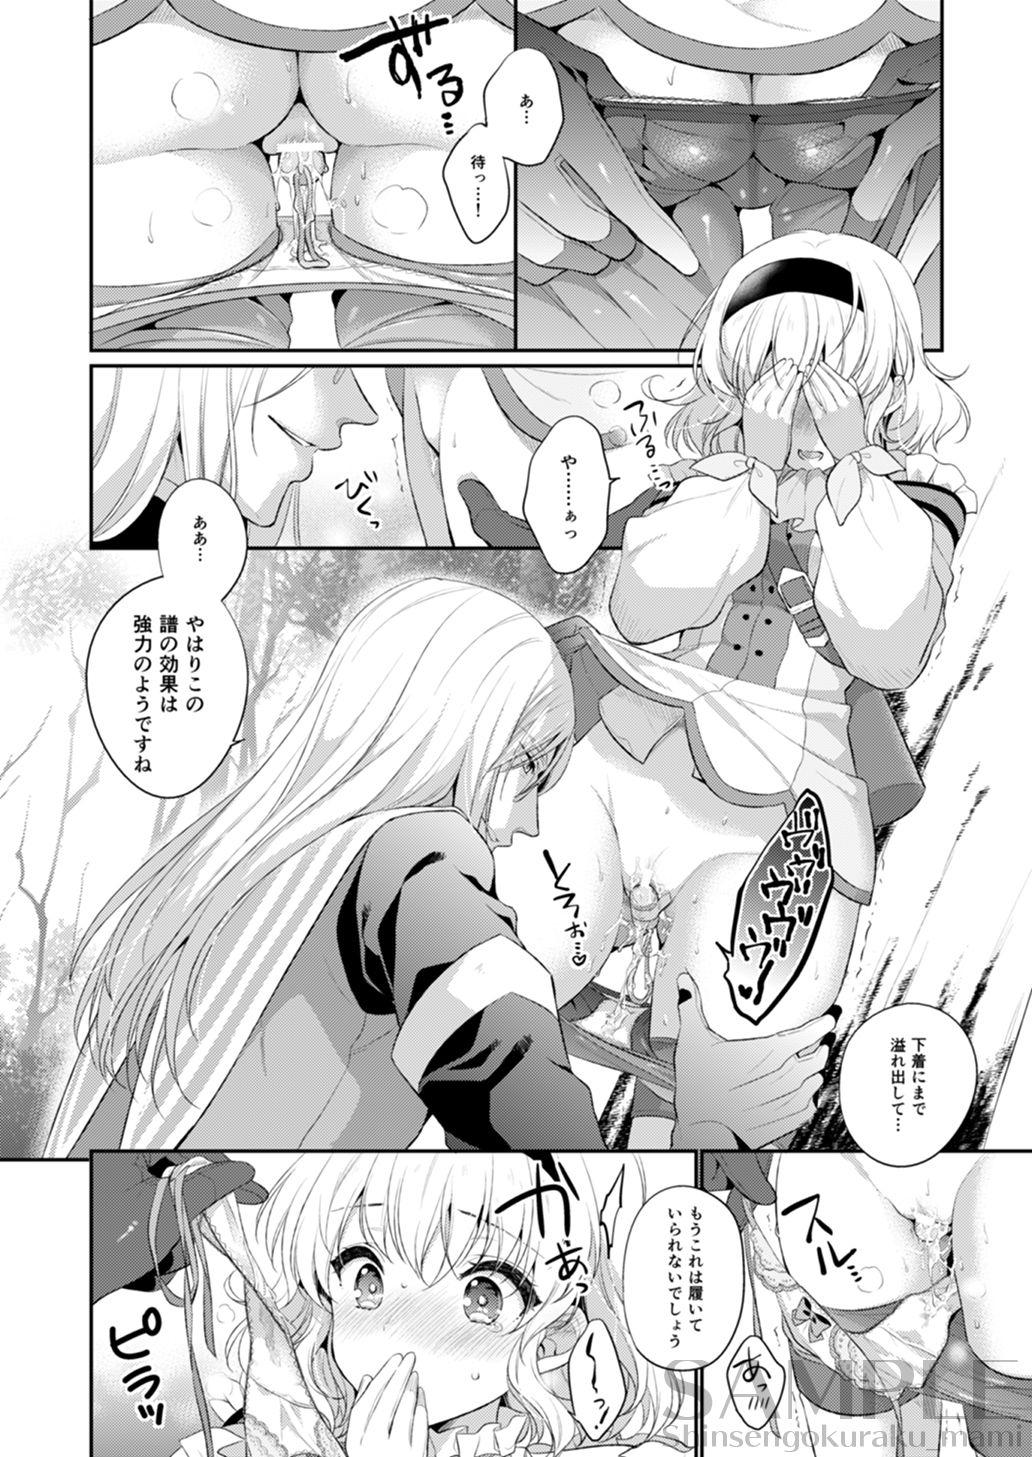 People Having Sex dolcemente - Tales of the abyss Yanks Featured - Page 11